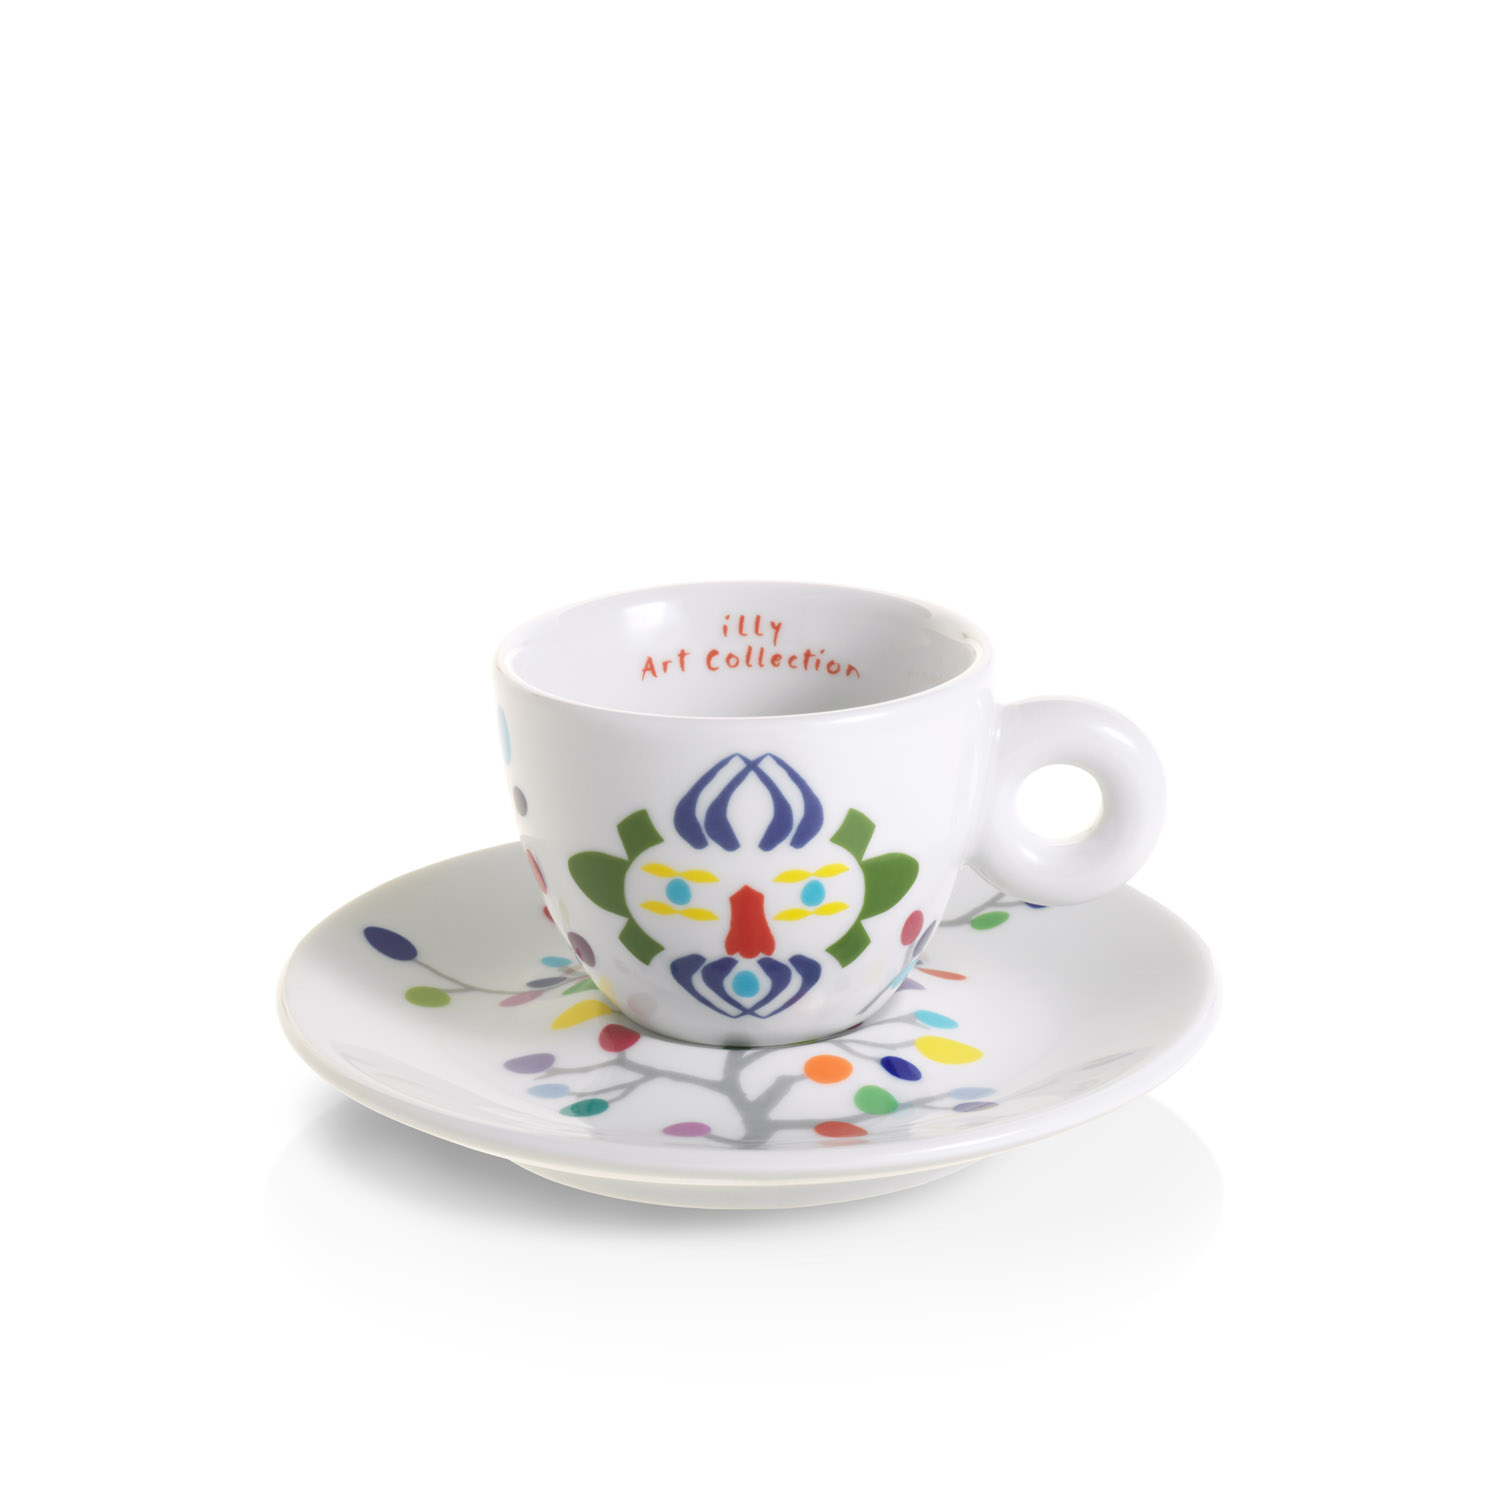 illy Art Collection PASCALE MARTHINE TAYOU Gift Set 6 Espresso Cups, Cups, 02-02-6090